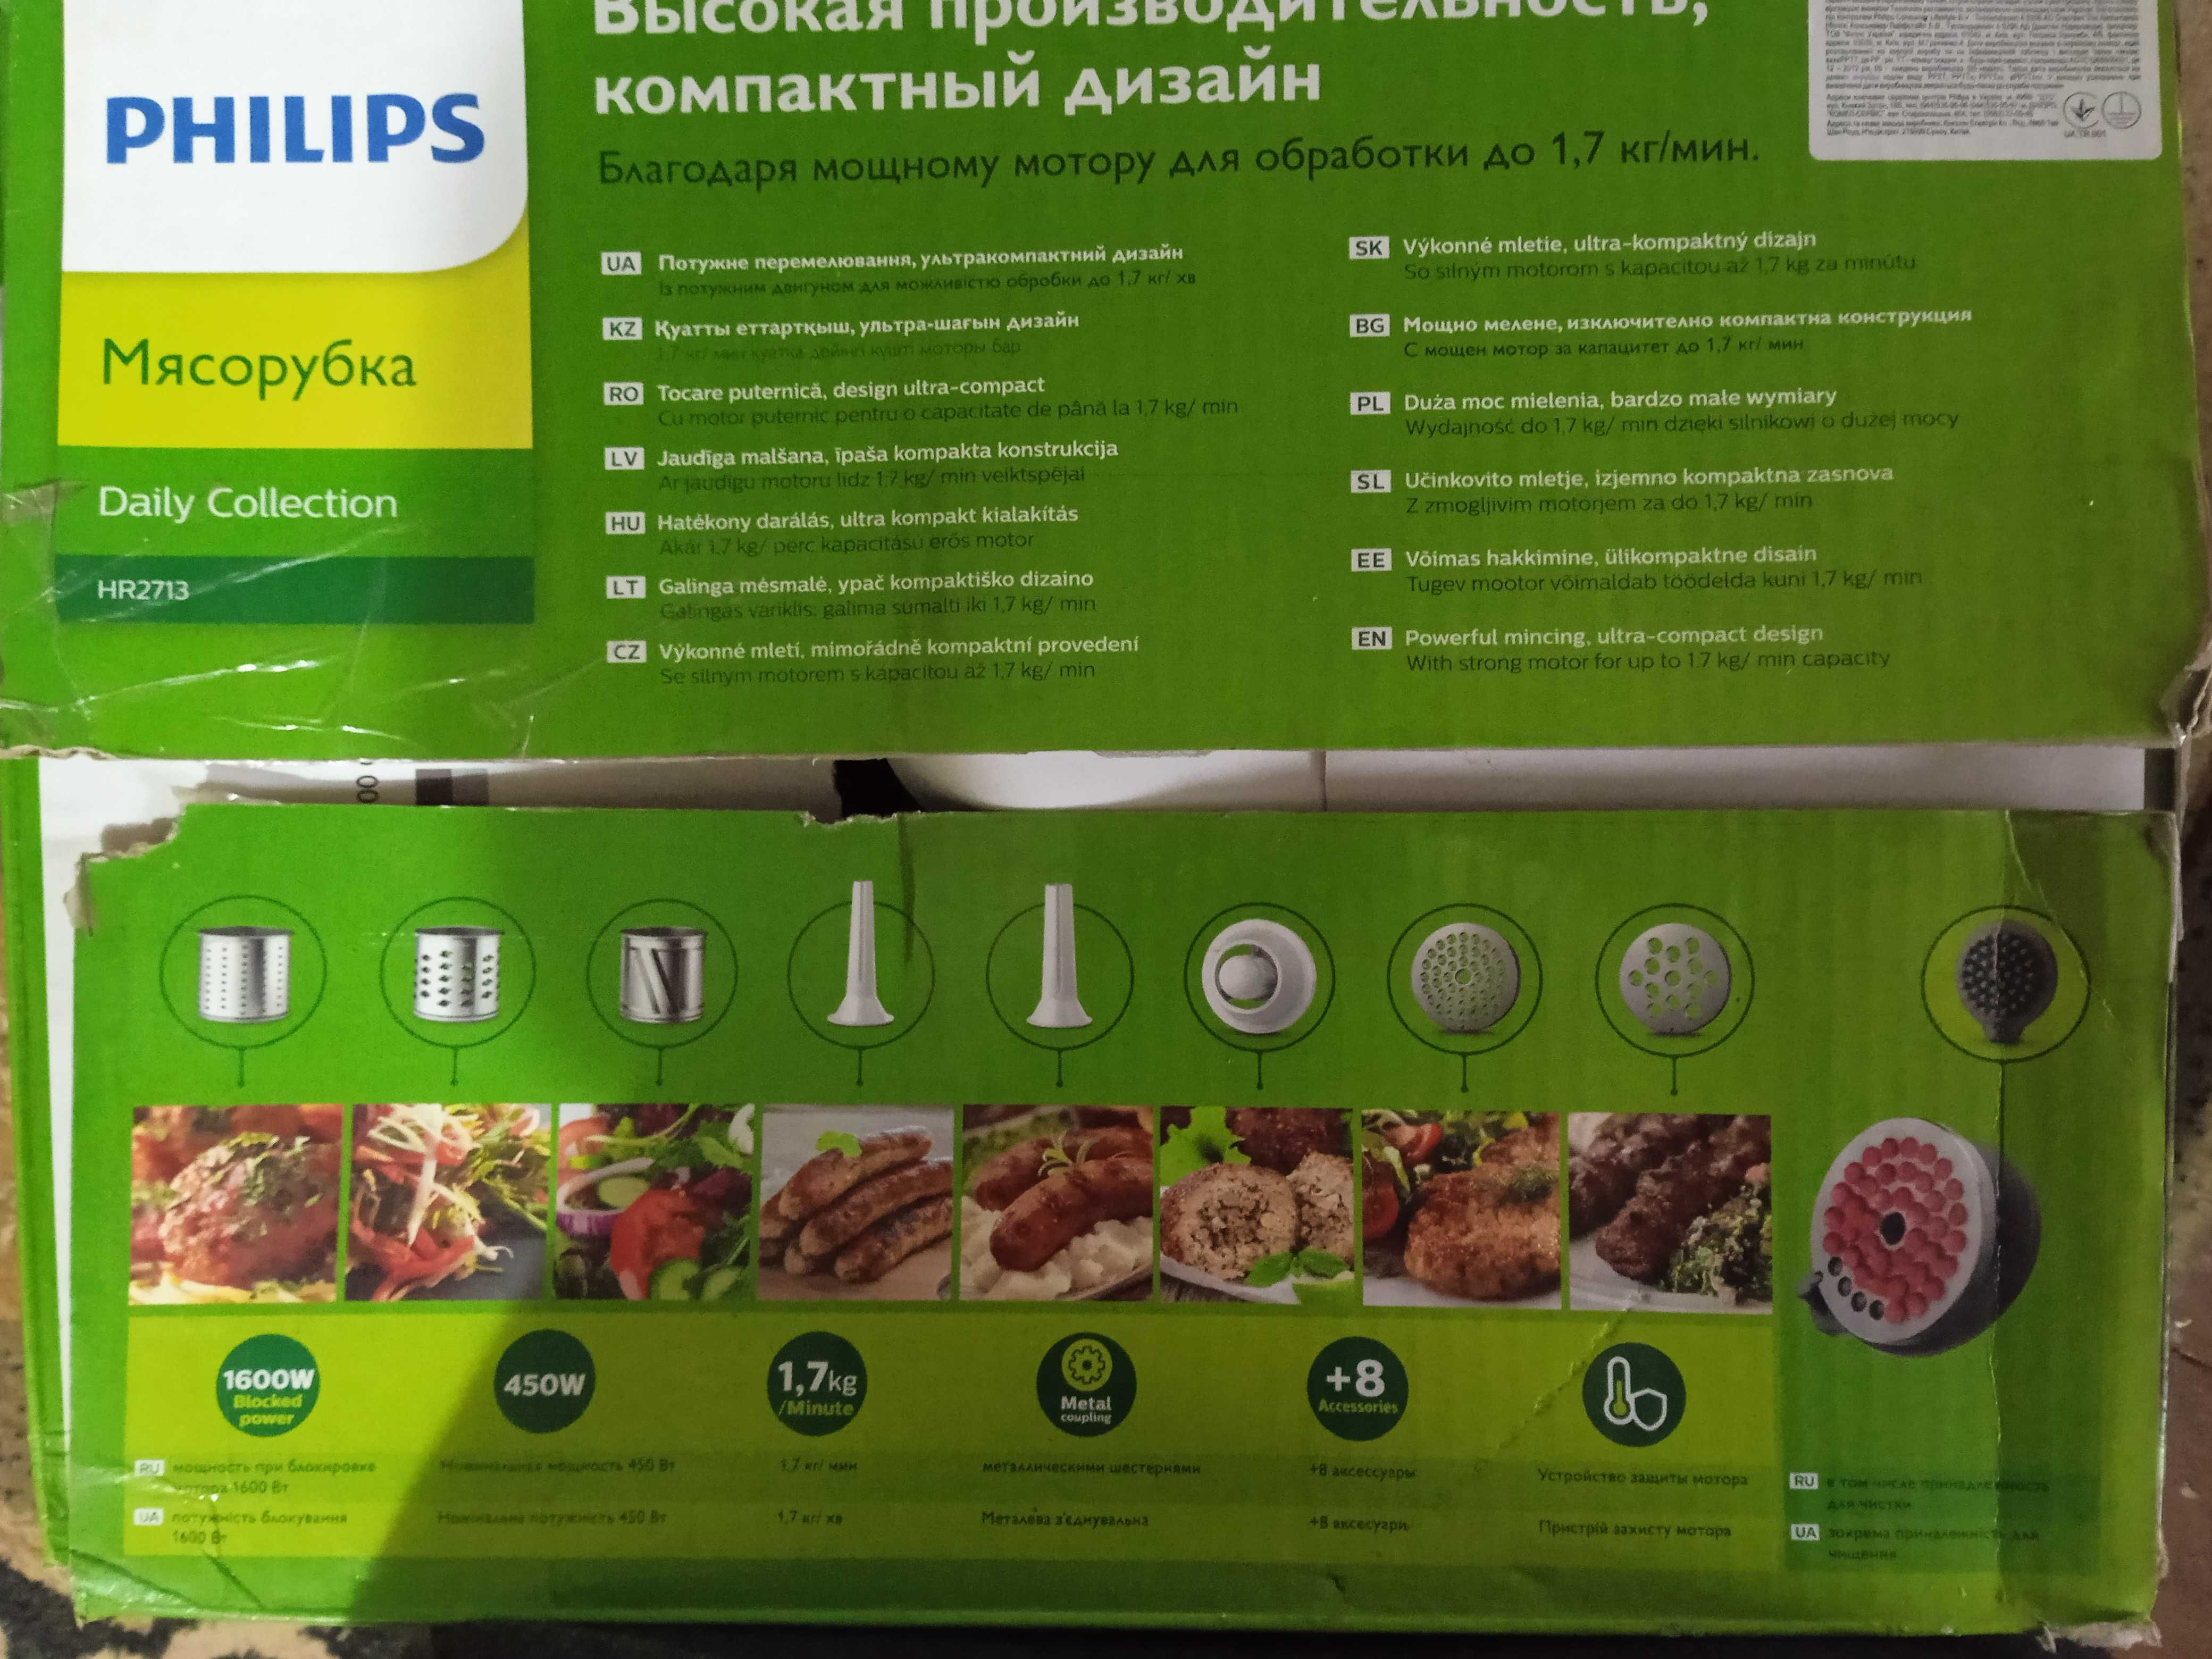 Мясорубка Philips Daily Collection HR2713